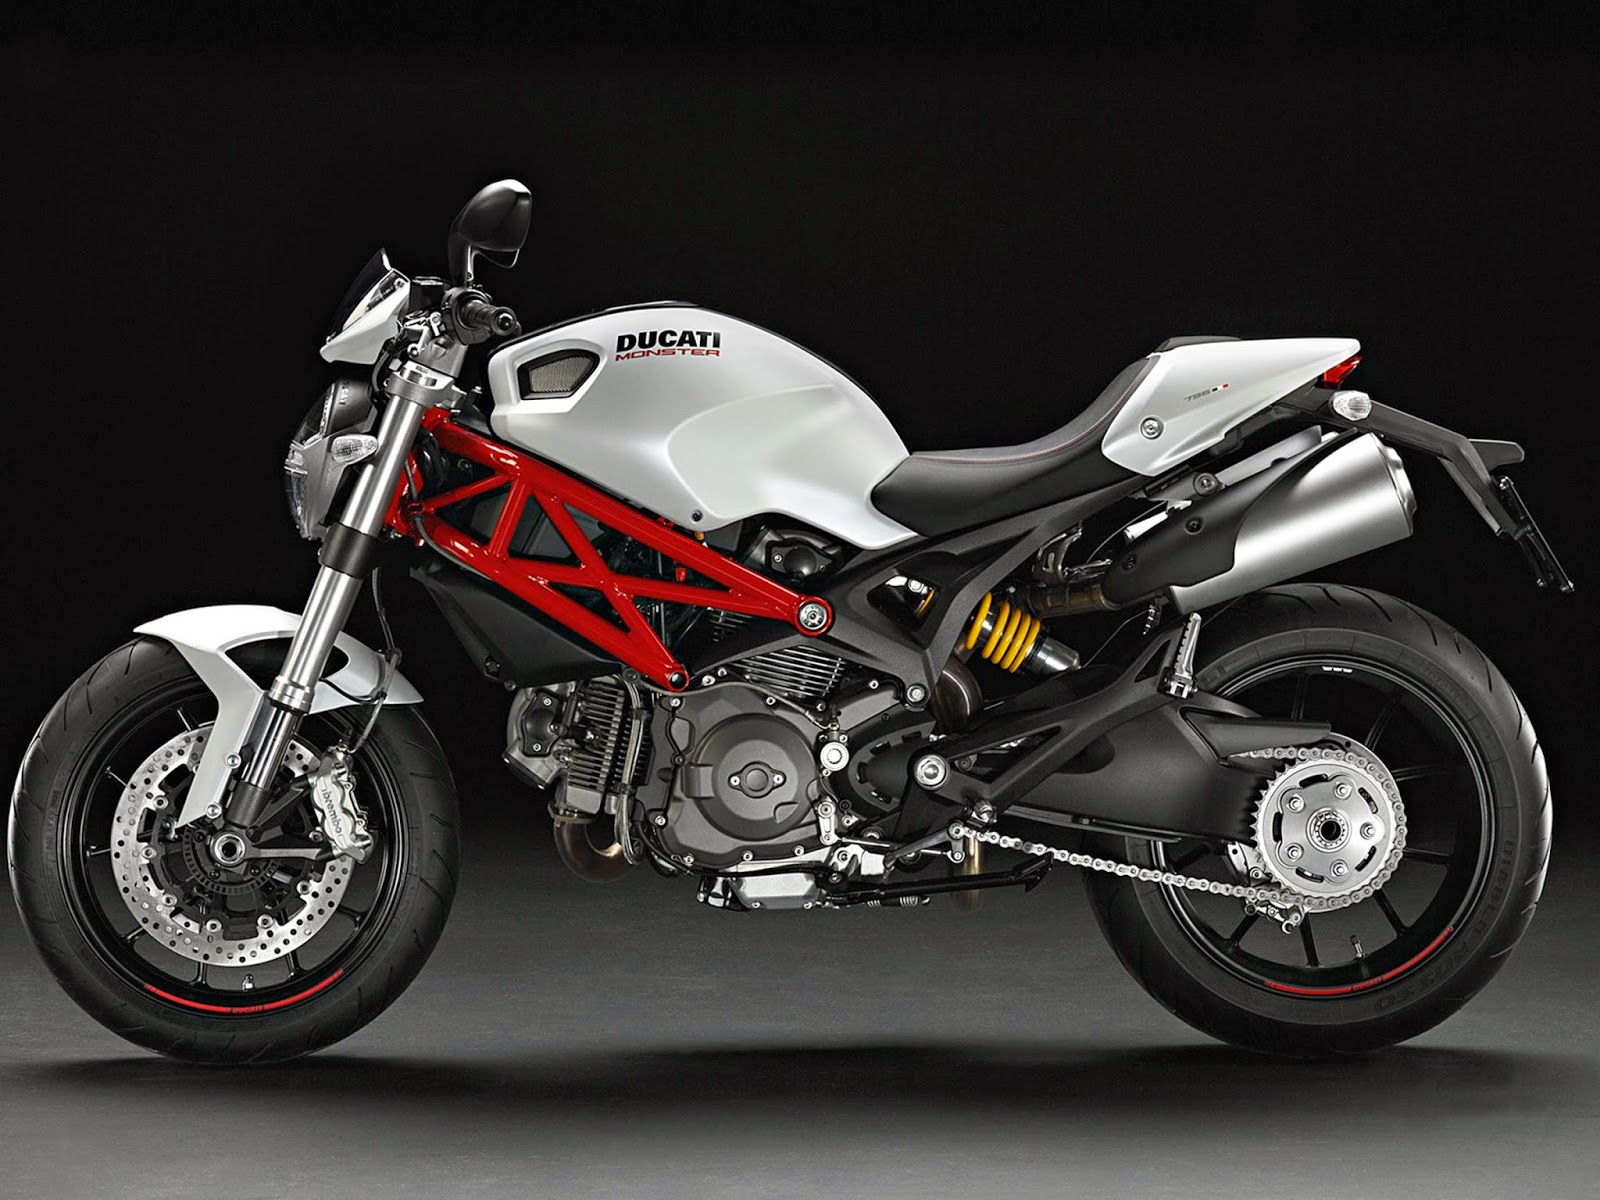 New Motorcycle Ducati Monster 796 Review and Price